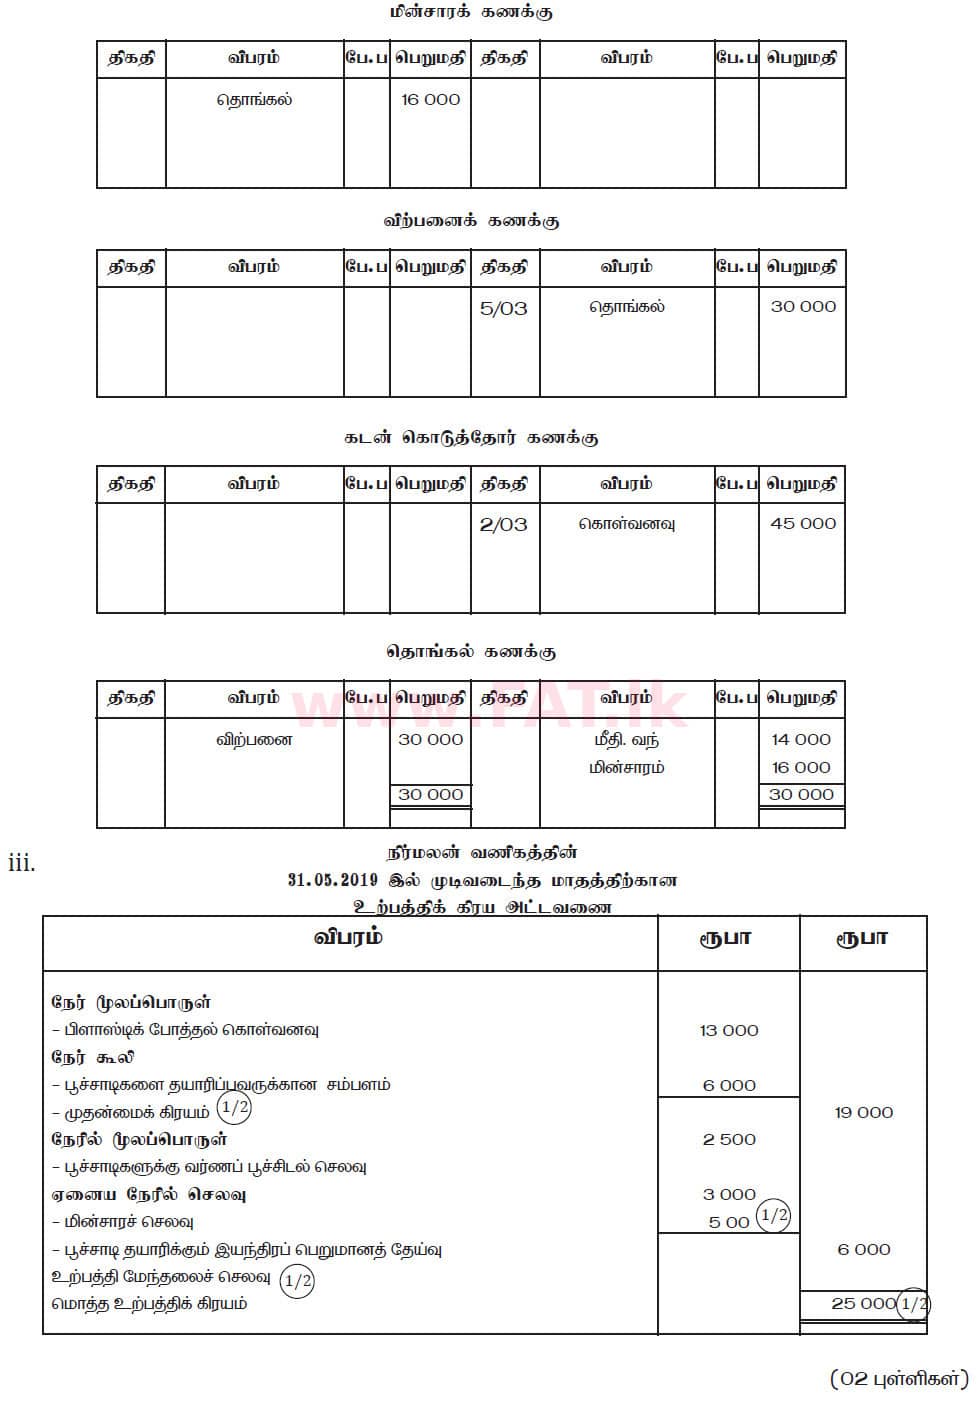 National Syllabus : Ordinary Level (O/L) Business and Accounting Studies - 2019 March - Paper II (தமிழ் Medium) 6 5994